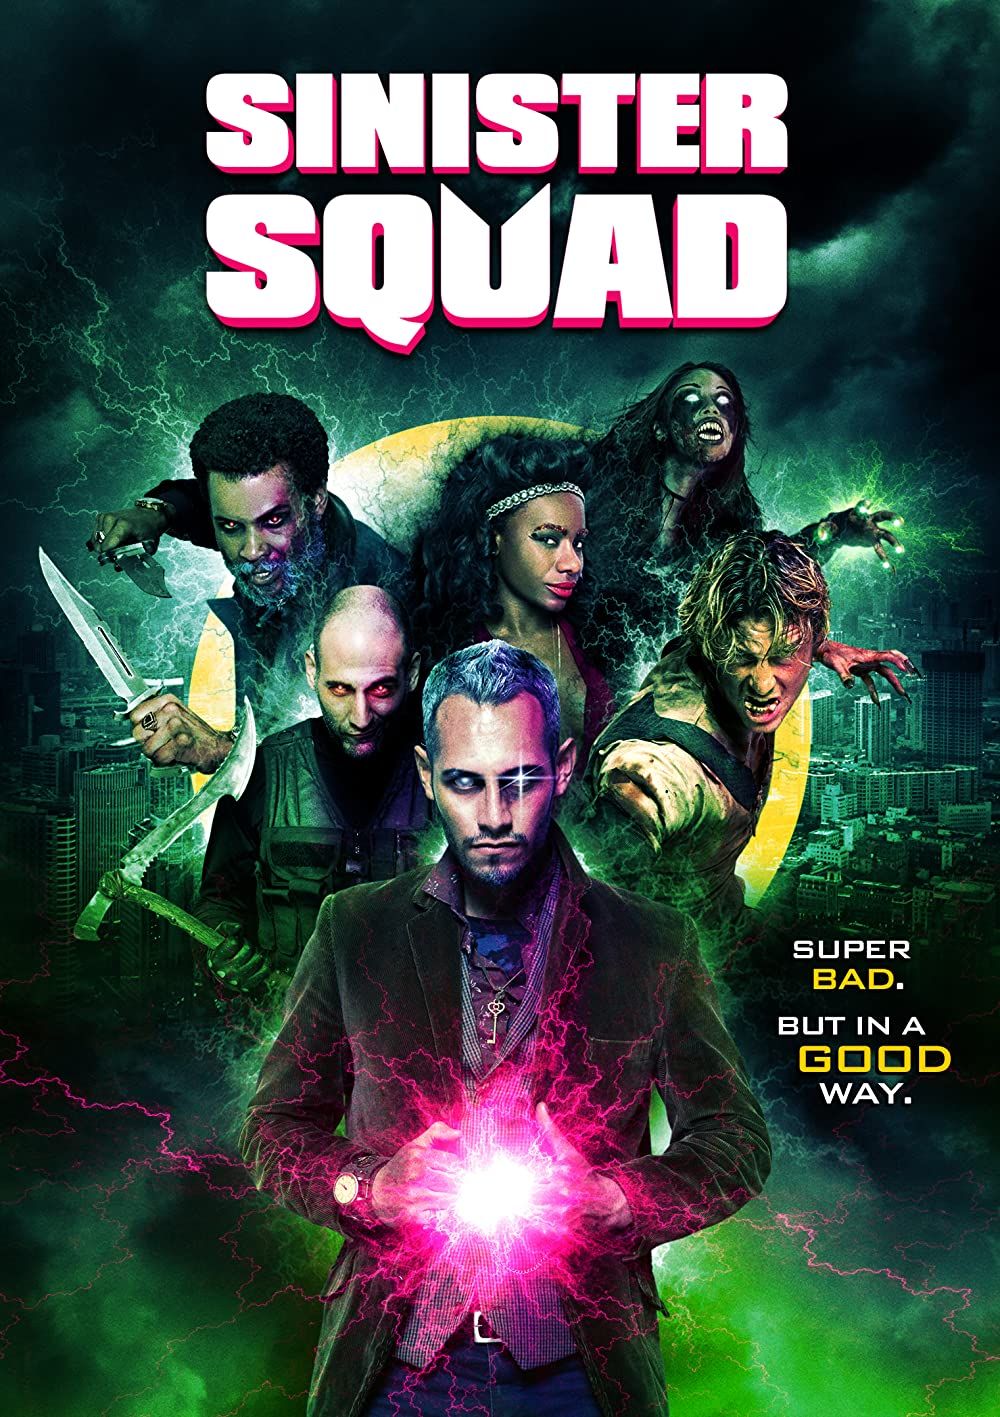 Sinister Squad (2016) Hindi ORG Dubbed BluRay download full movie